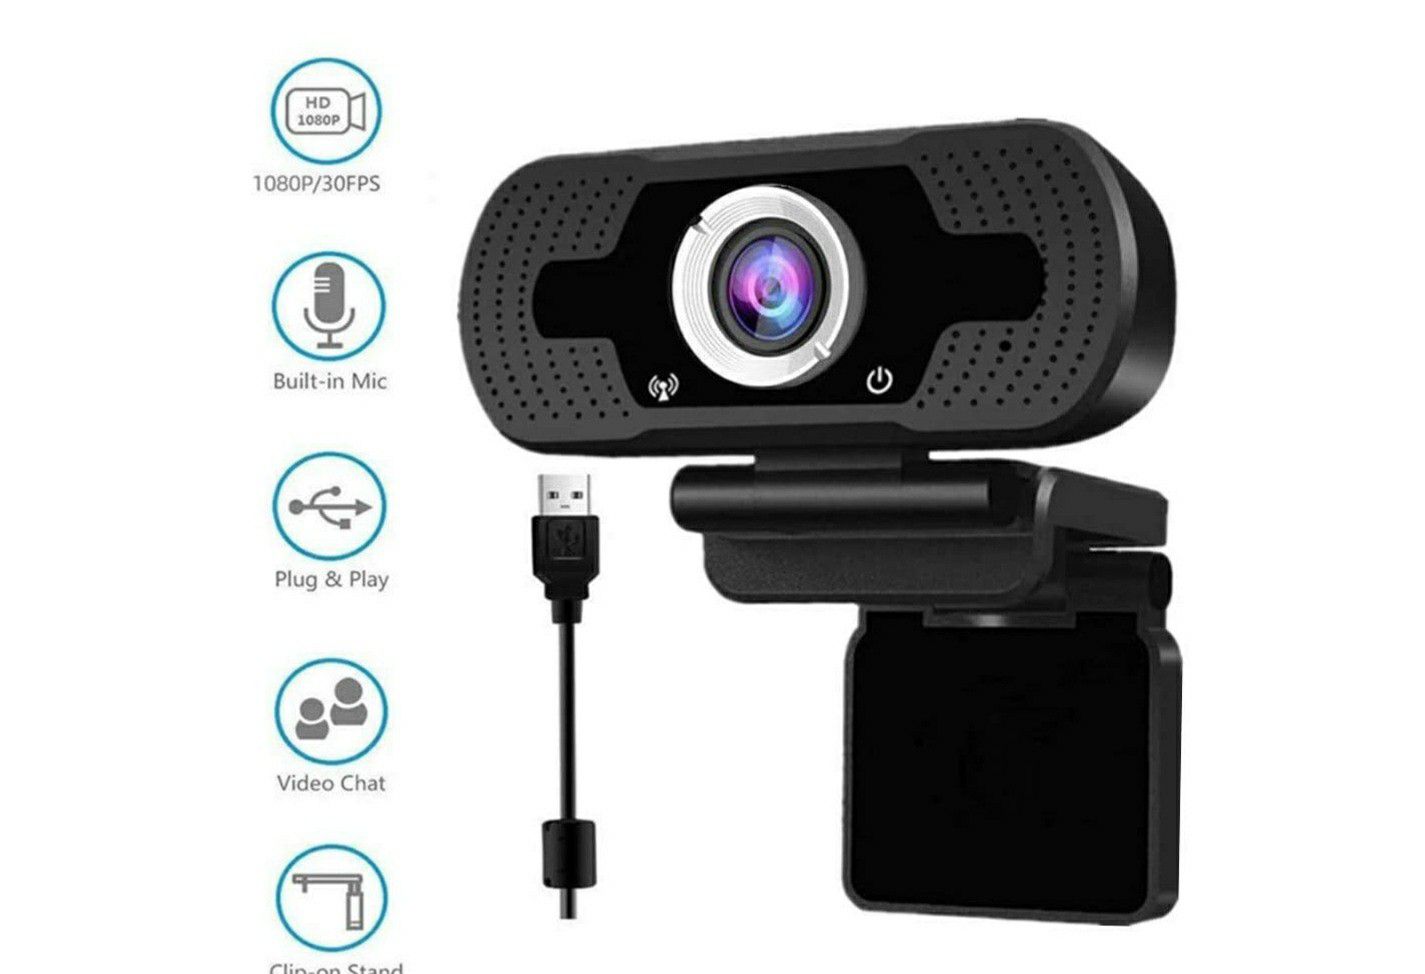 1080p HD webcam with microphone.